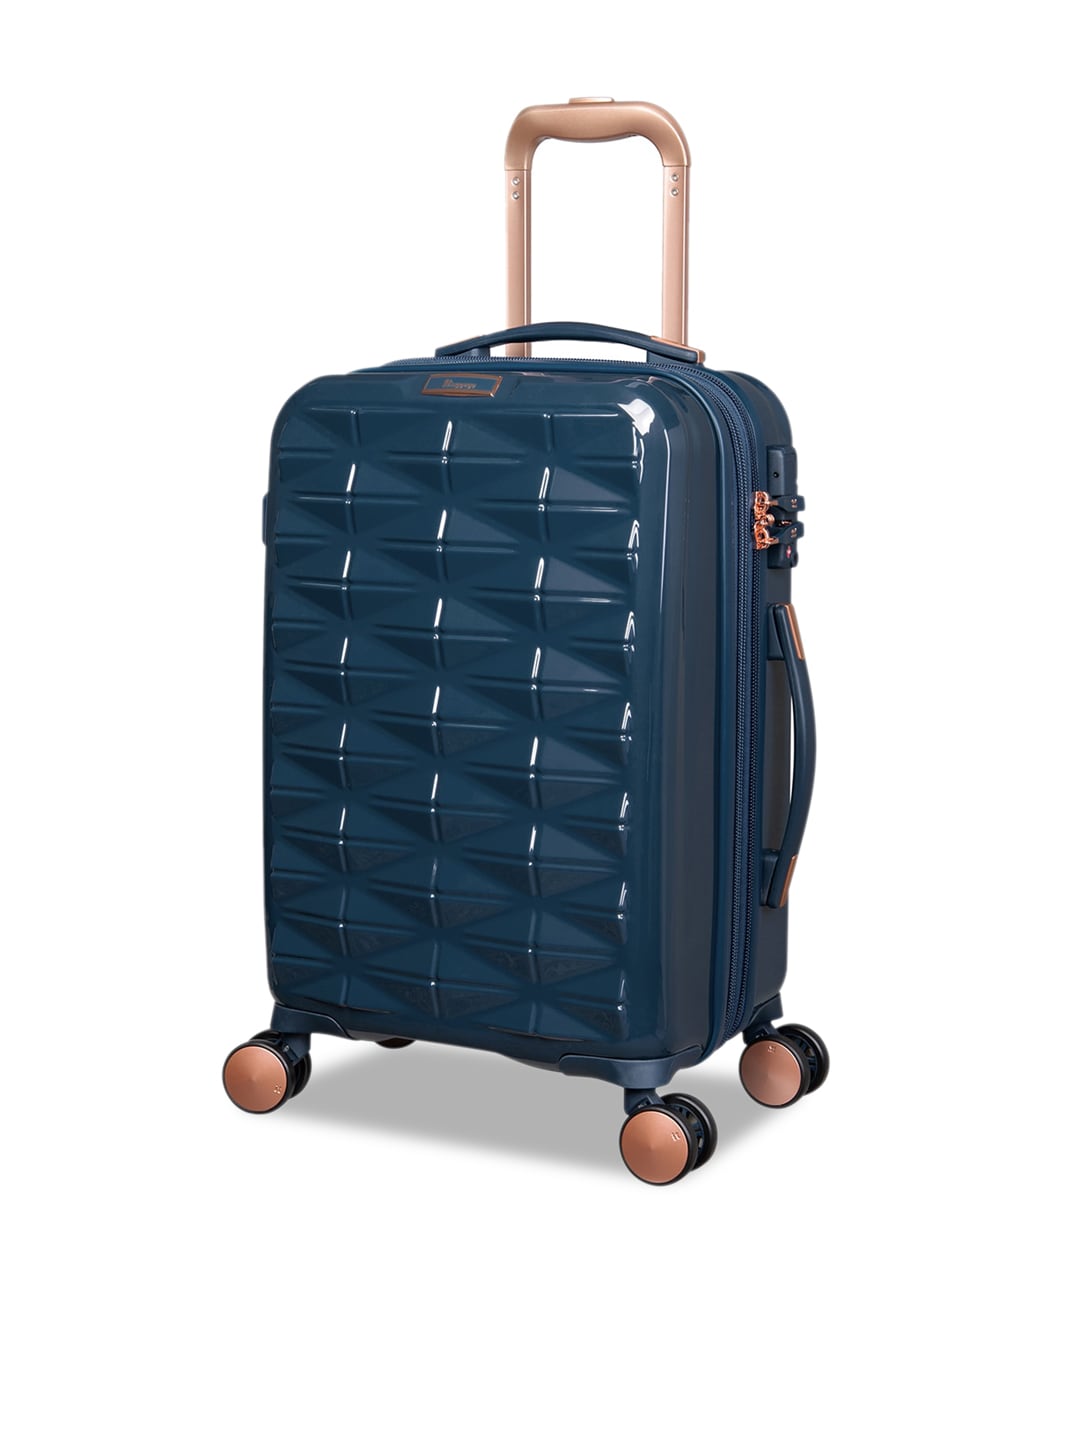 IT luggage Unisex Blue Trolley Bag Price in India